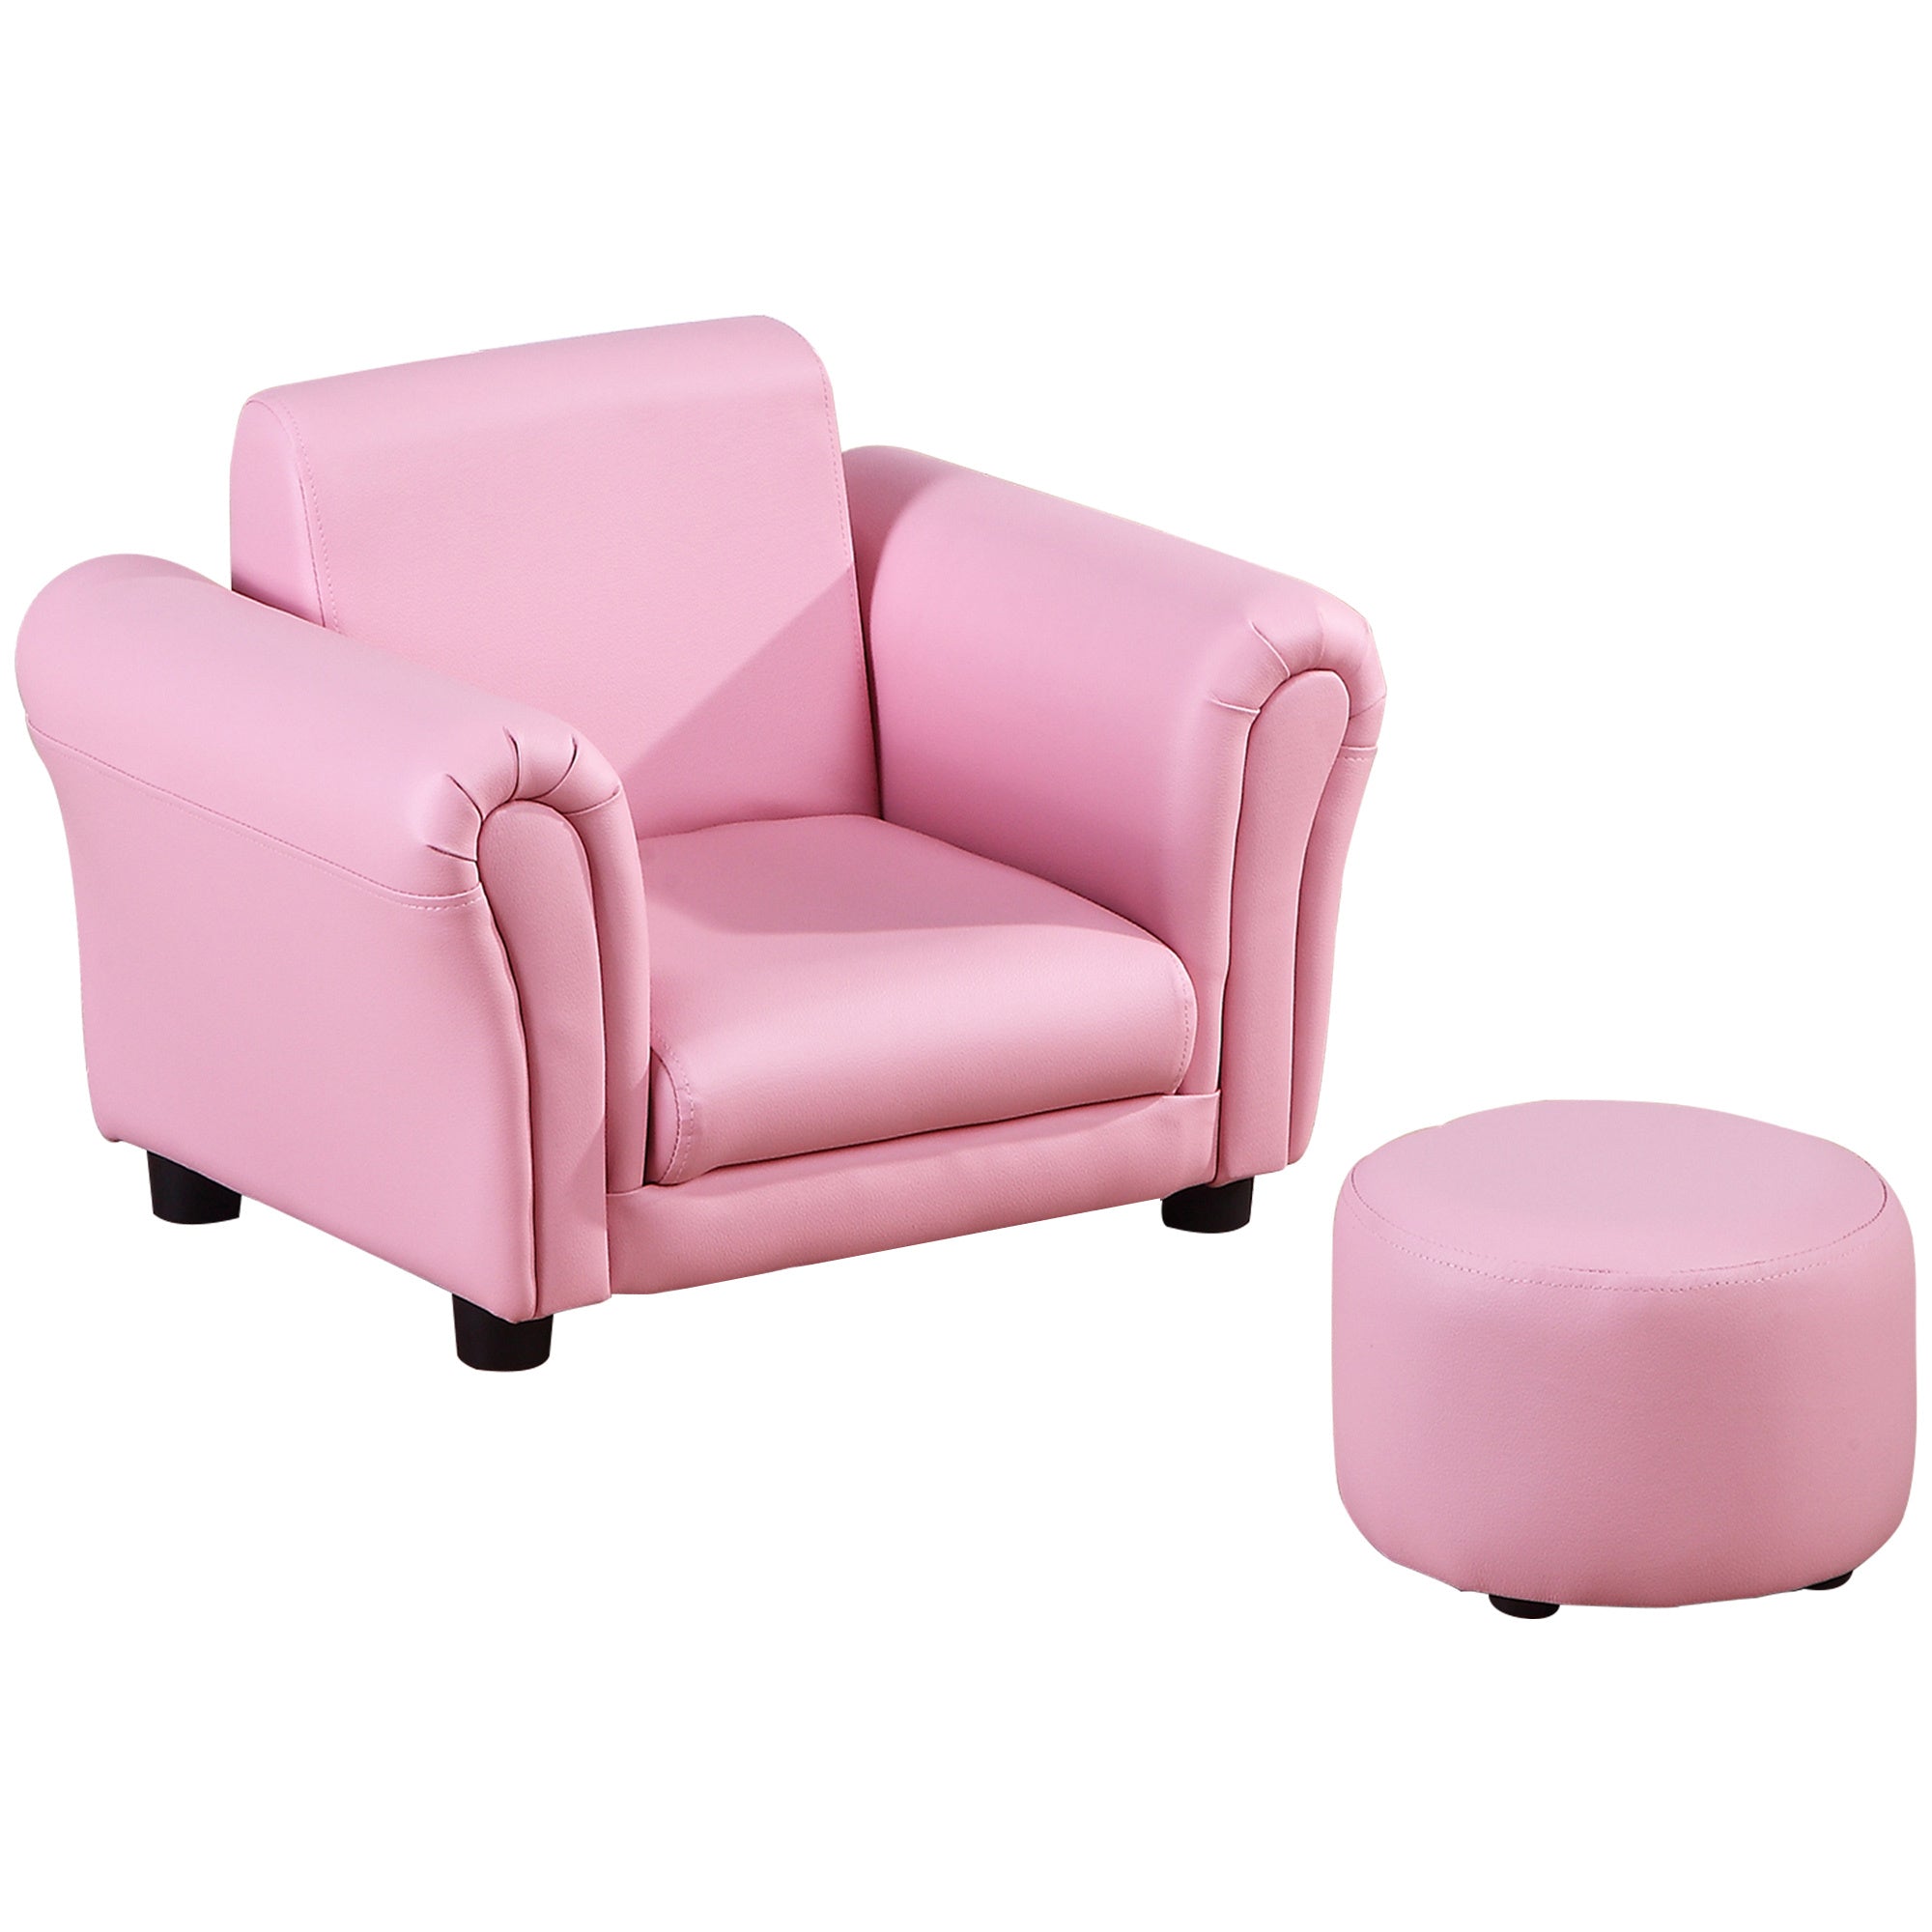 Kids Sofa Set with Footstool, Upholstered Armchair for pink-wood